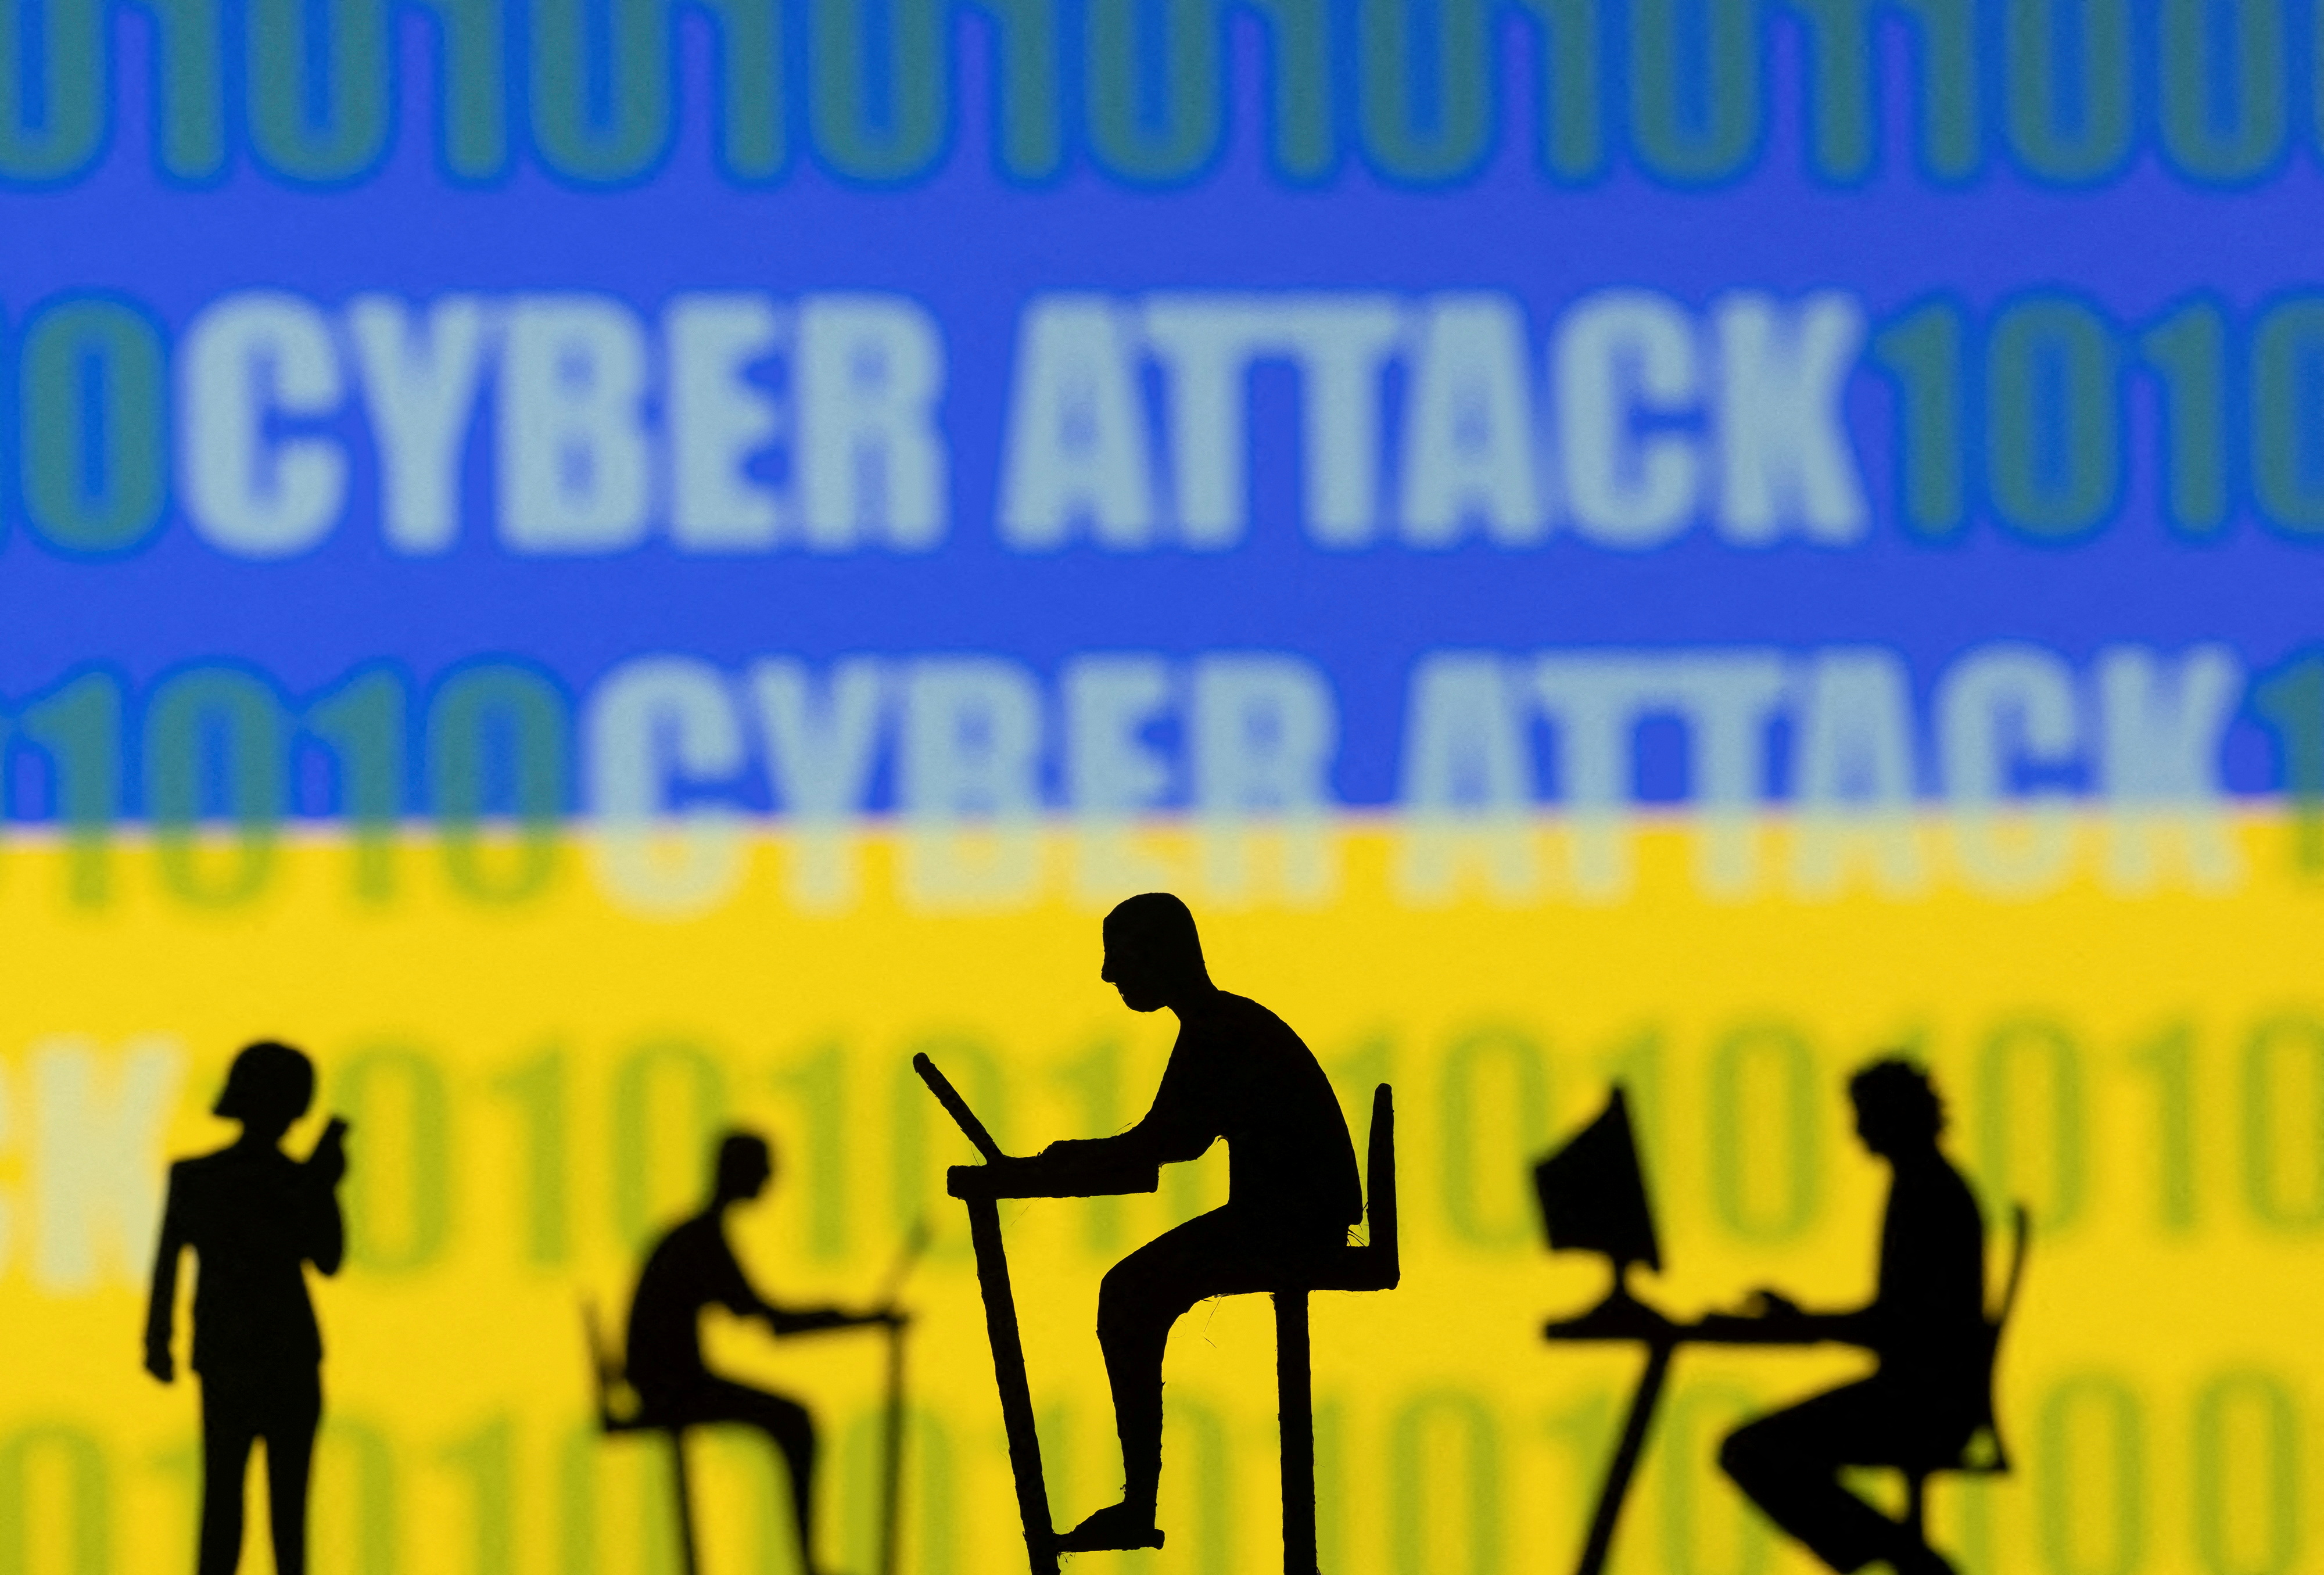 Figurines with computers and smartphones are seen in front of the words "Cyber Attack", binary codes and the Ukrainian flag, in this illustration taken February 15, 2022. REUTERS/Dado Ruvic/Illustration/File Photo